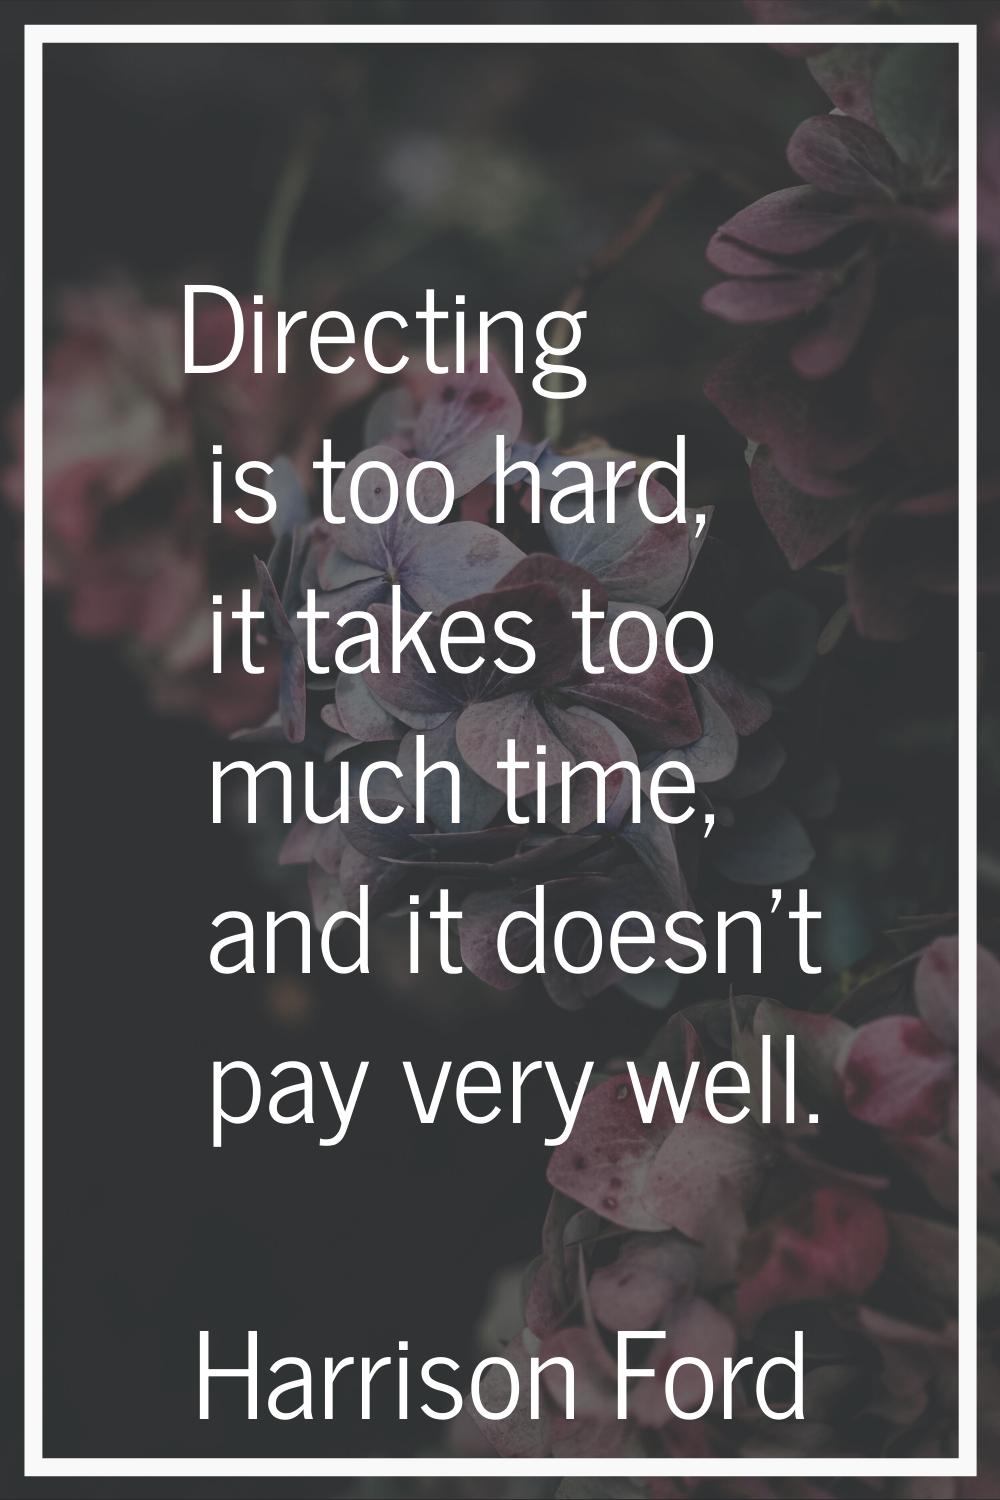 Directing is too hard, it takes too much time, and it doesn't pay very well.